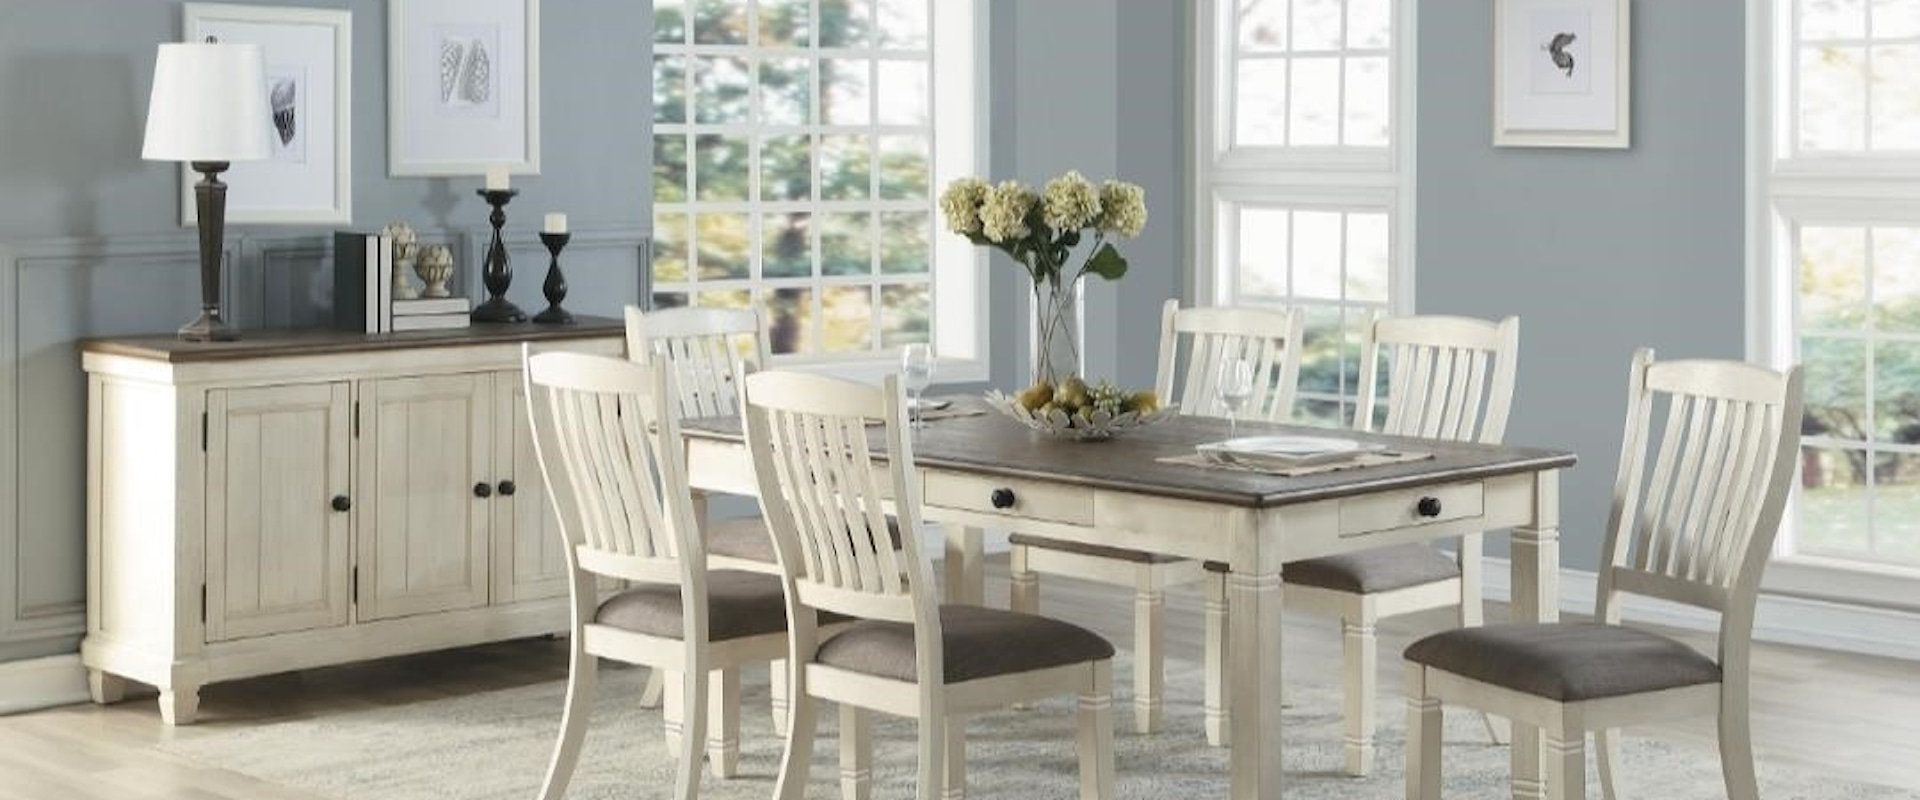 8-Piece Antique White Dining Group 4